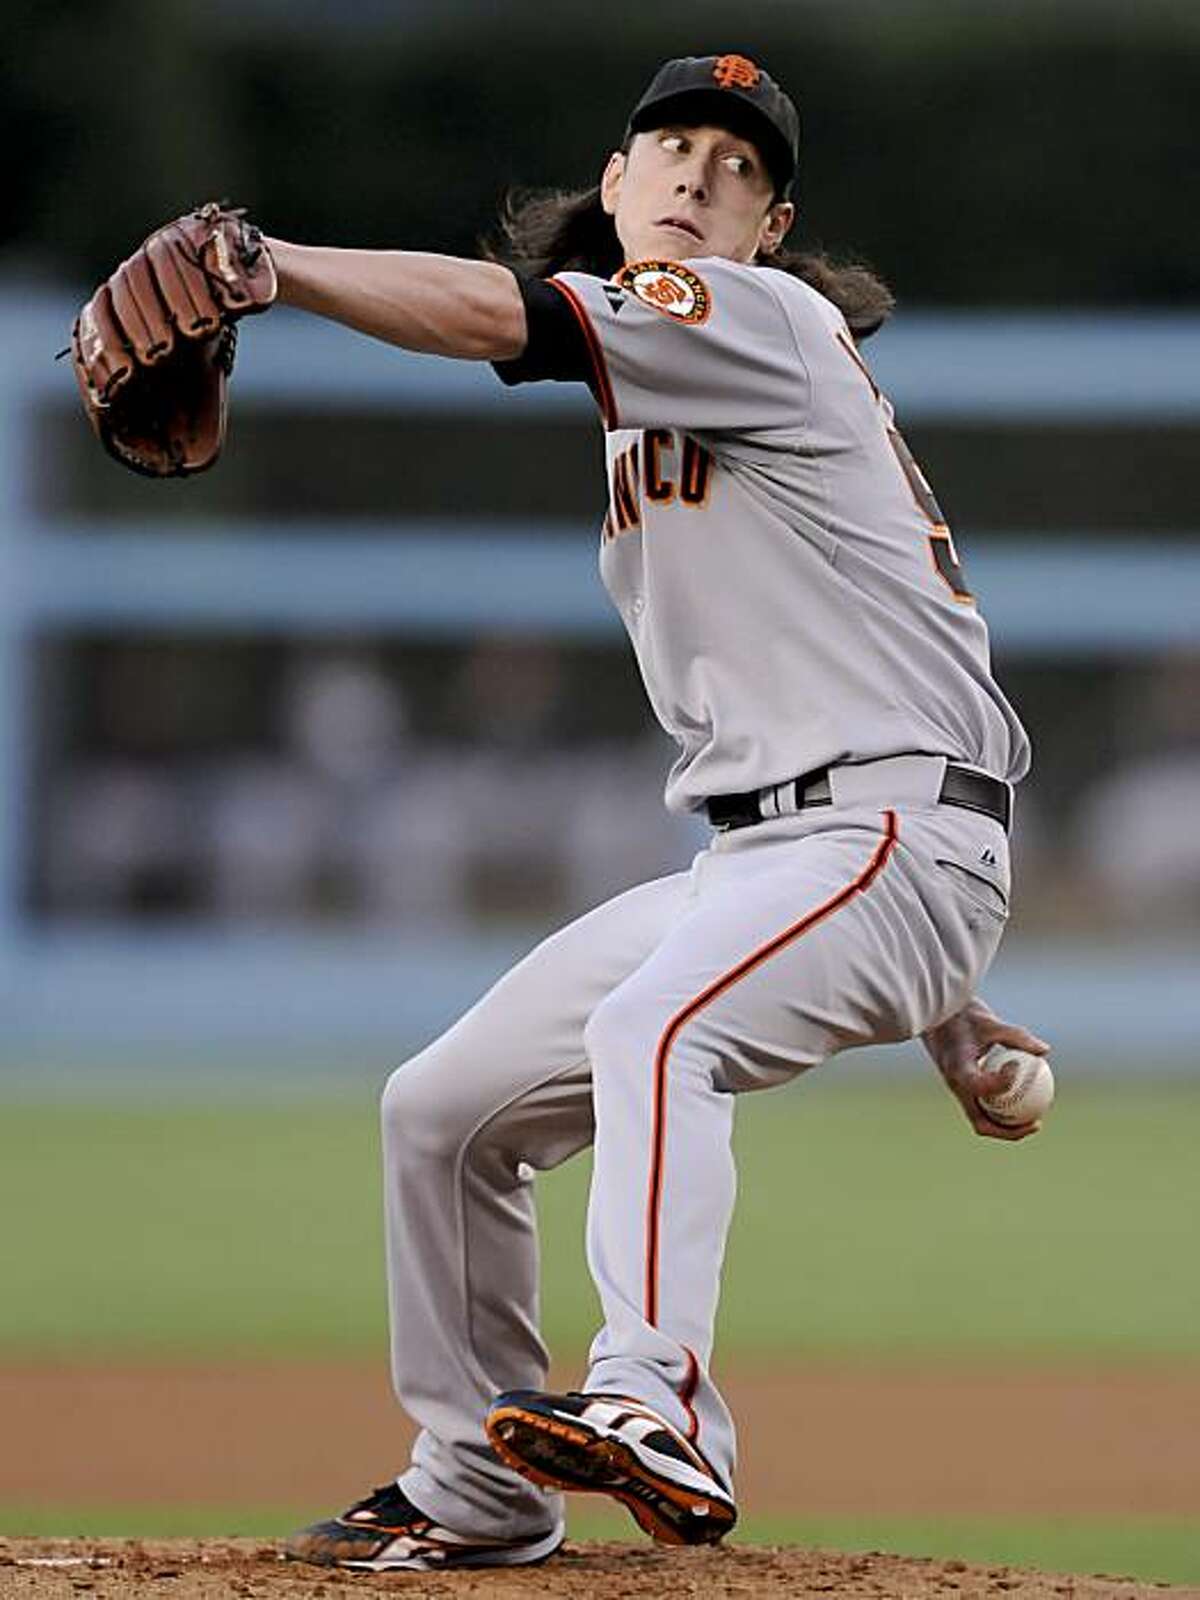 San Francisco Giants' Tim Lincecum pitches in the first inning of a baseball game against the Los Angeles Dodgers, Tuesday, July 20, 2010, in Los Angeles.